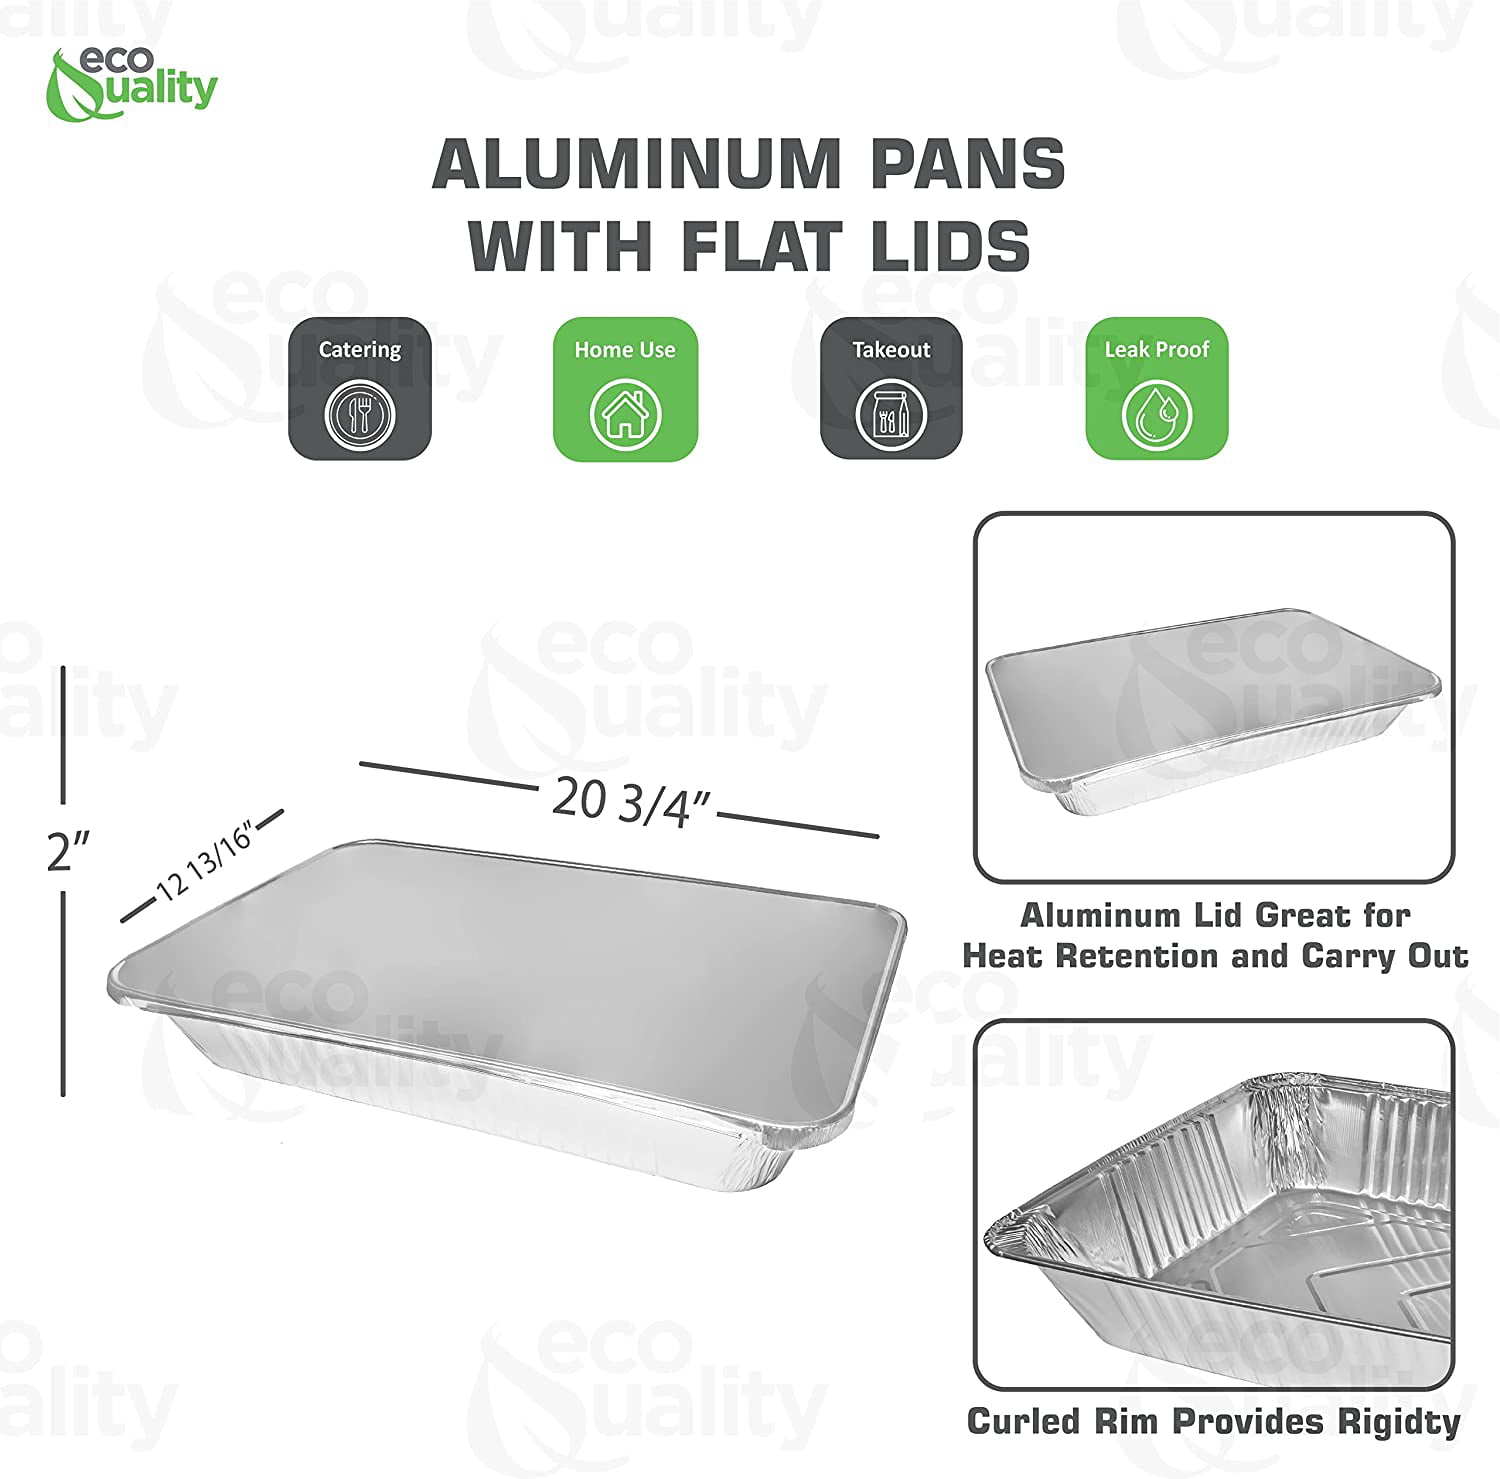 Large Aluminum Pans With Lids Disposable (15 Pans 15 Lids) Full Heavy Duty  Roasting, Broiling, Baking, Catering Pans 21x13x3